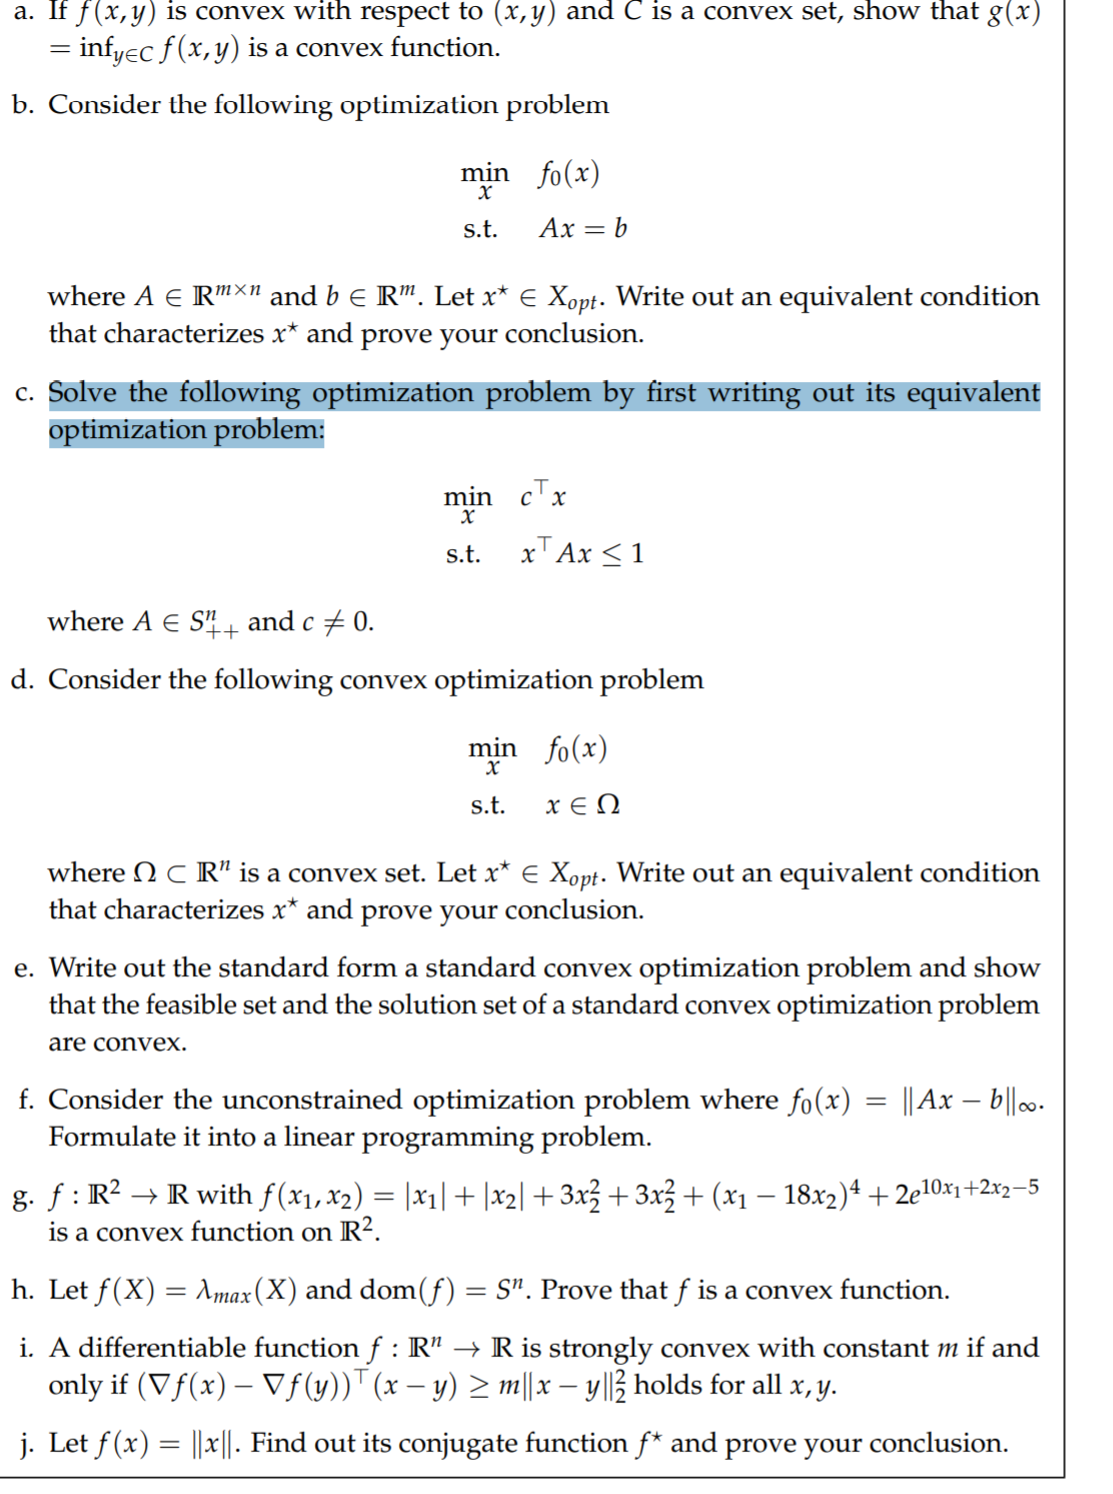 a. If f(x,y) is convex with respect to (x,y) and C is a convex set, show that g(x)
= infyec f(x,y) is a convex function.
b. Consider the following optimization problem
min fo(x)
s.t.
Ax = b
where A E R"X" and b e R". Let x* E Xopt. Write out an equivalent condition
that characterizes x* and prove your conclusion.
c. Solve the following optimization problem by first writing out its equivalent
optimization problem:
min
c'x
s.t.
xT Ax <1
where A E S+
and c + 0.
d. Consider the following convex optimization problem
min fo(x)
s.t.
x E N
where N C R" is a convex set. Let x* E Xopt. Write out an equivalent condition
that characterizes x* and prove your conclusion.
e. Write out the standard form a standard convex optimization problem and show
that the feasible set and the solution set of a standard convex optimization problem
are convex.
f. Consider the unconstrained optimization problem where fo(x) = ||Ax – b||.
Formulate it into a linear programming problem.
g. f : R? → R with f(x1, x2) = |xı|+|x2| + 3x3 + 3x3 + (x1 – 18x2)4 + 2e10x1+2x2=5
is a convex function on R?.
-
h. Let f(X) = Amax(X) and dom(f) = S". Prove that f is a convex function.
i. A differentiable function f : R" → R is strongly convex with constant m if and
only if (Vf(x) – Vf(y))" (x – y) > m||x – y||3 holds for all x, y.
j. Let f (x) = ||x||. Find out its conjugate function f* and prove your conclusion.
